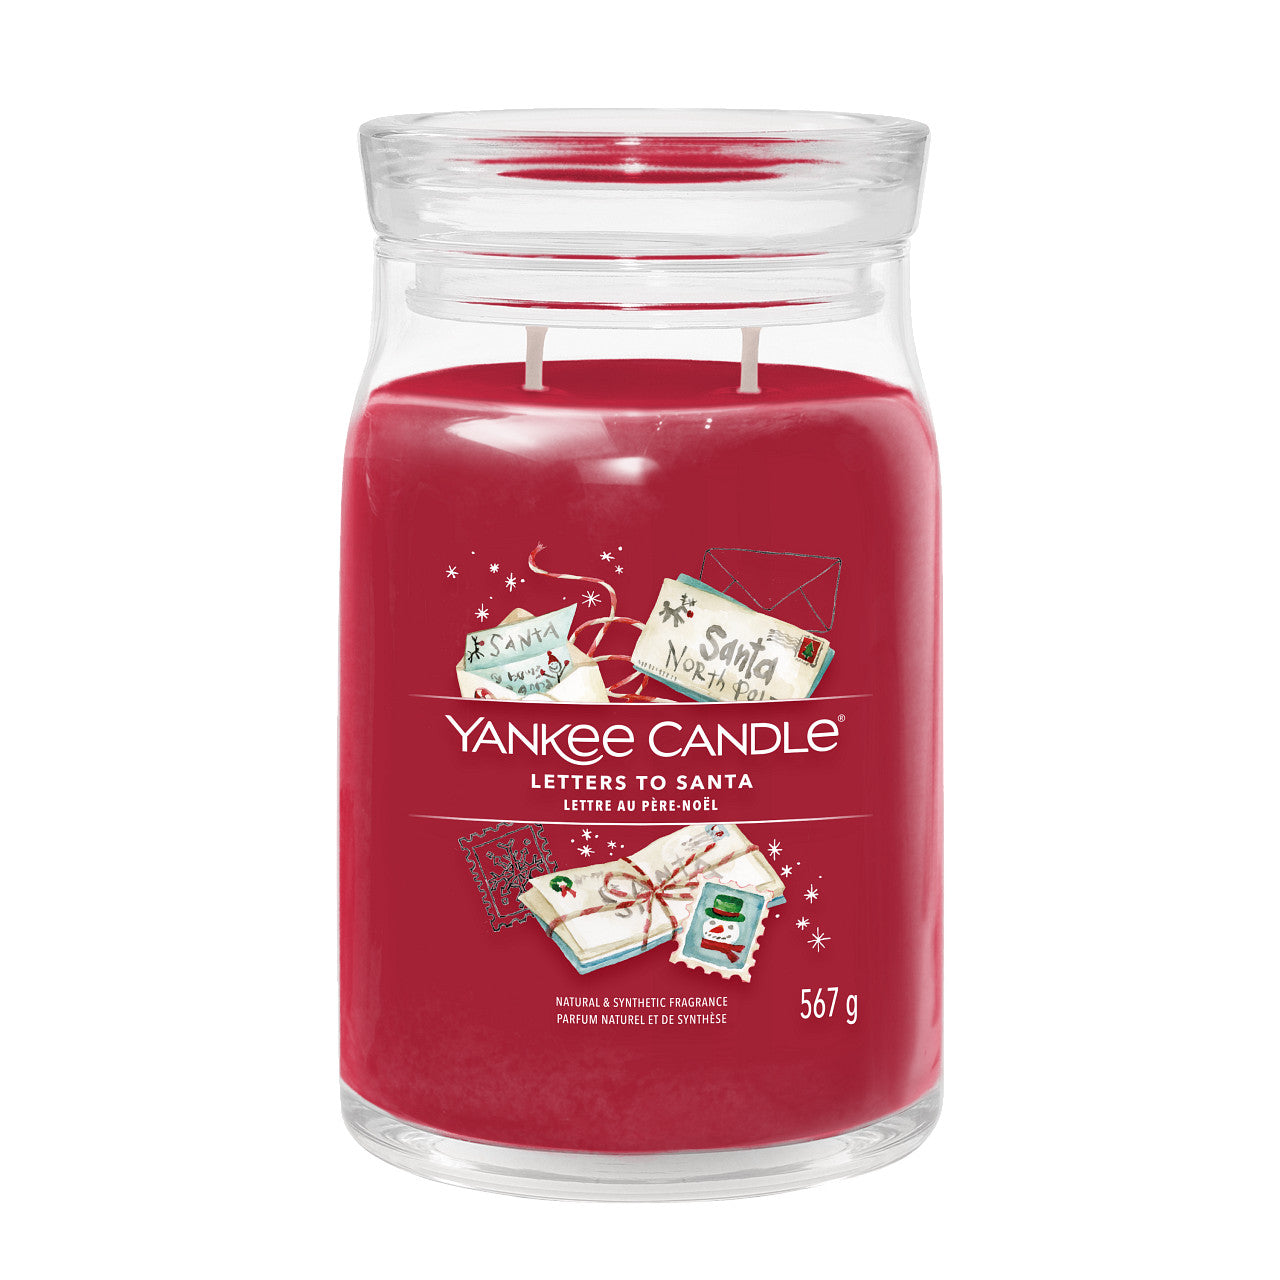 Letters to Santa - Signature Large Jar Scented Candle